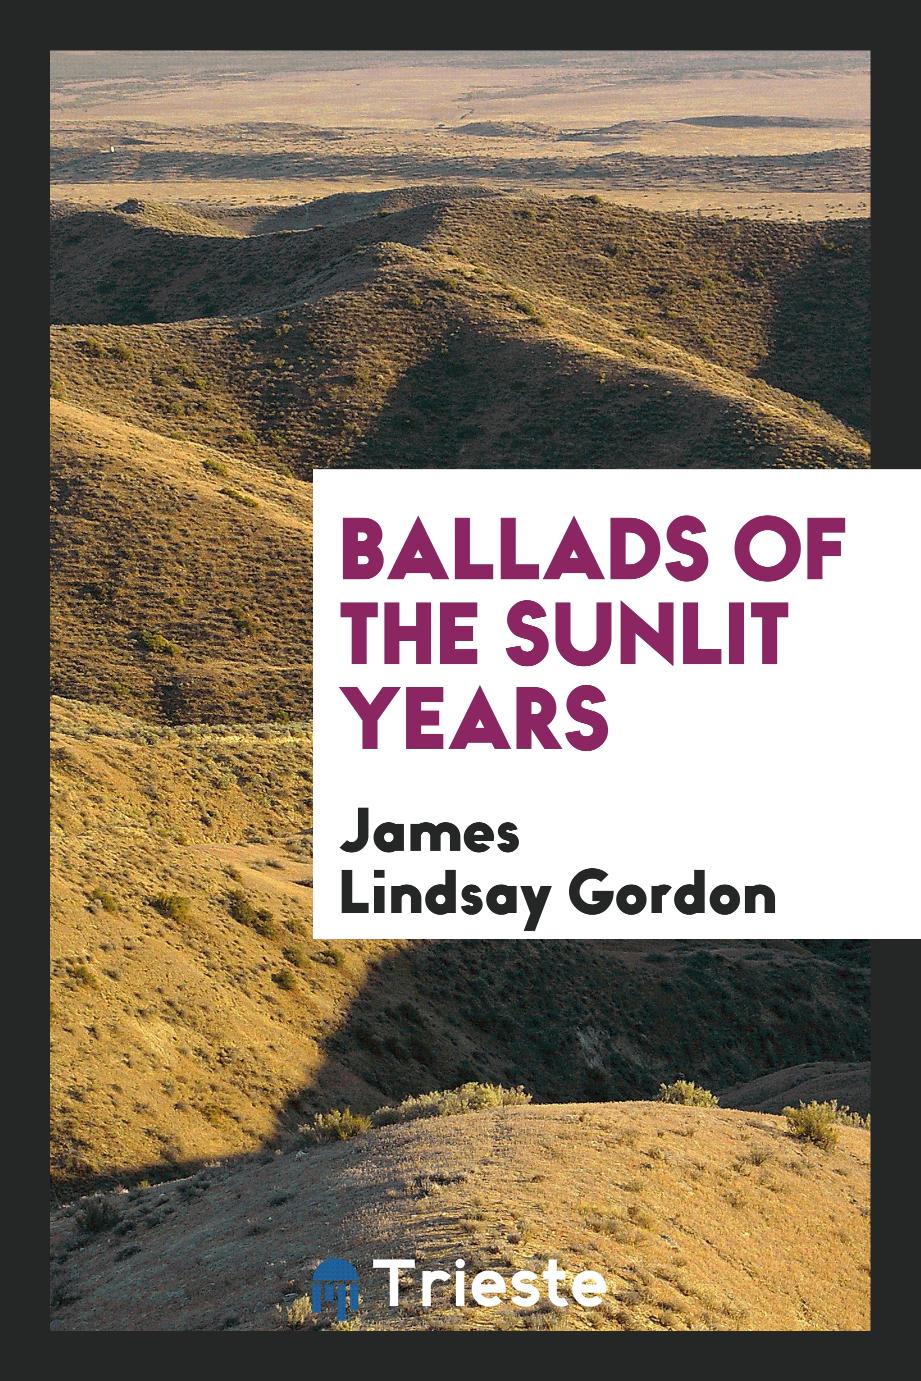 Ballads of the Sunlit Years